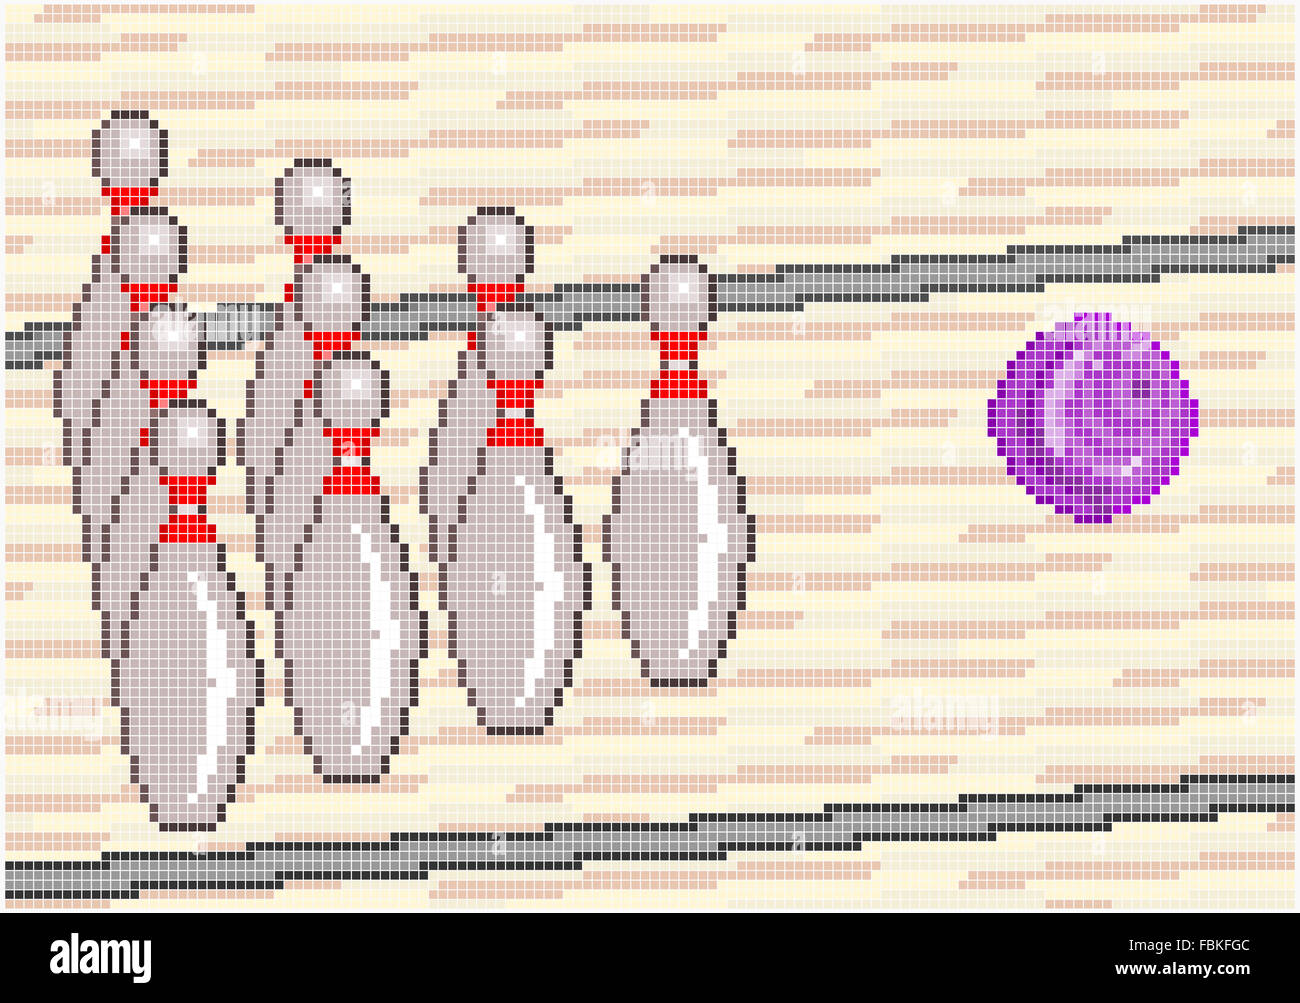 Illustration of the game of Ten pin Bowling with a bowling ball rolling down the lane to strike the pins. Square pixels used. Stock Photo